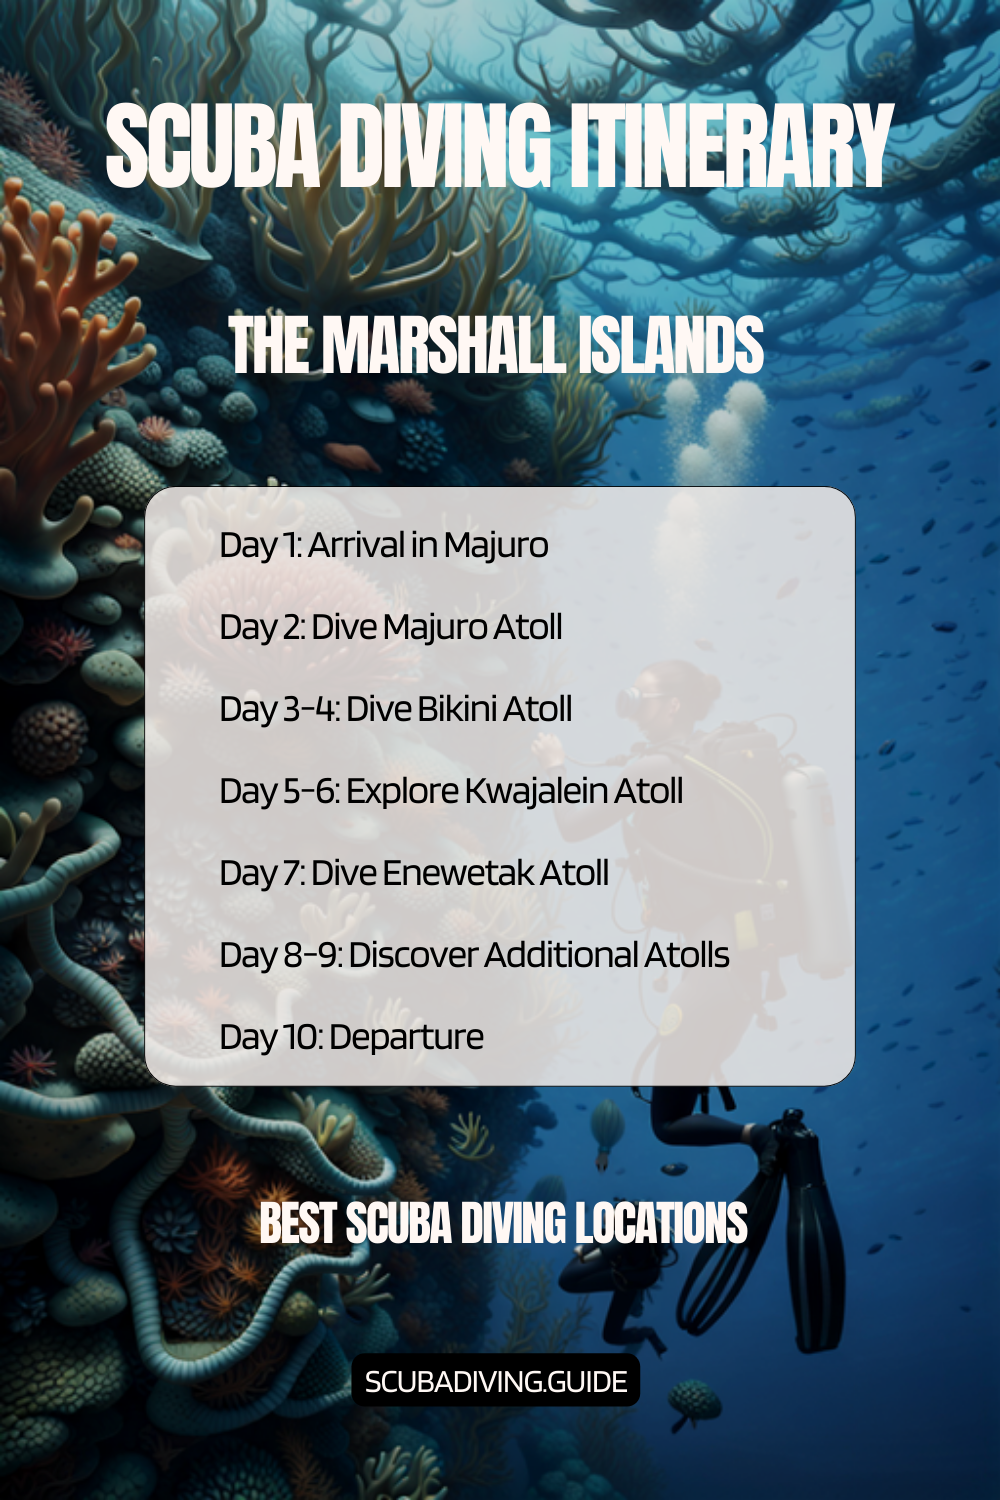 Marshall Islands Recommended Scuba Diving Itinerary